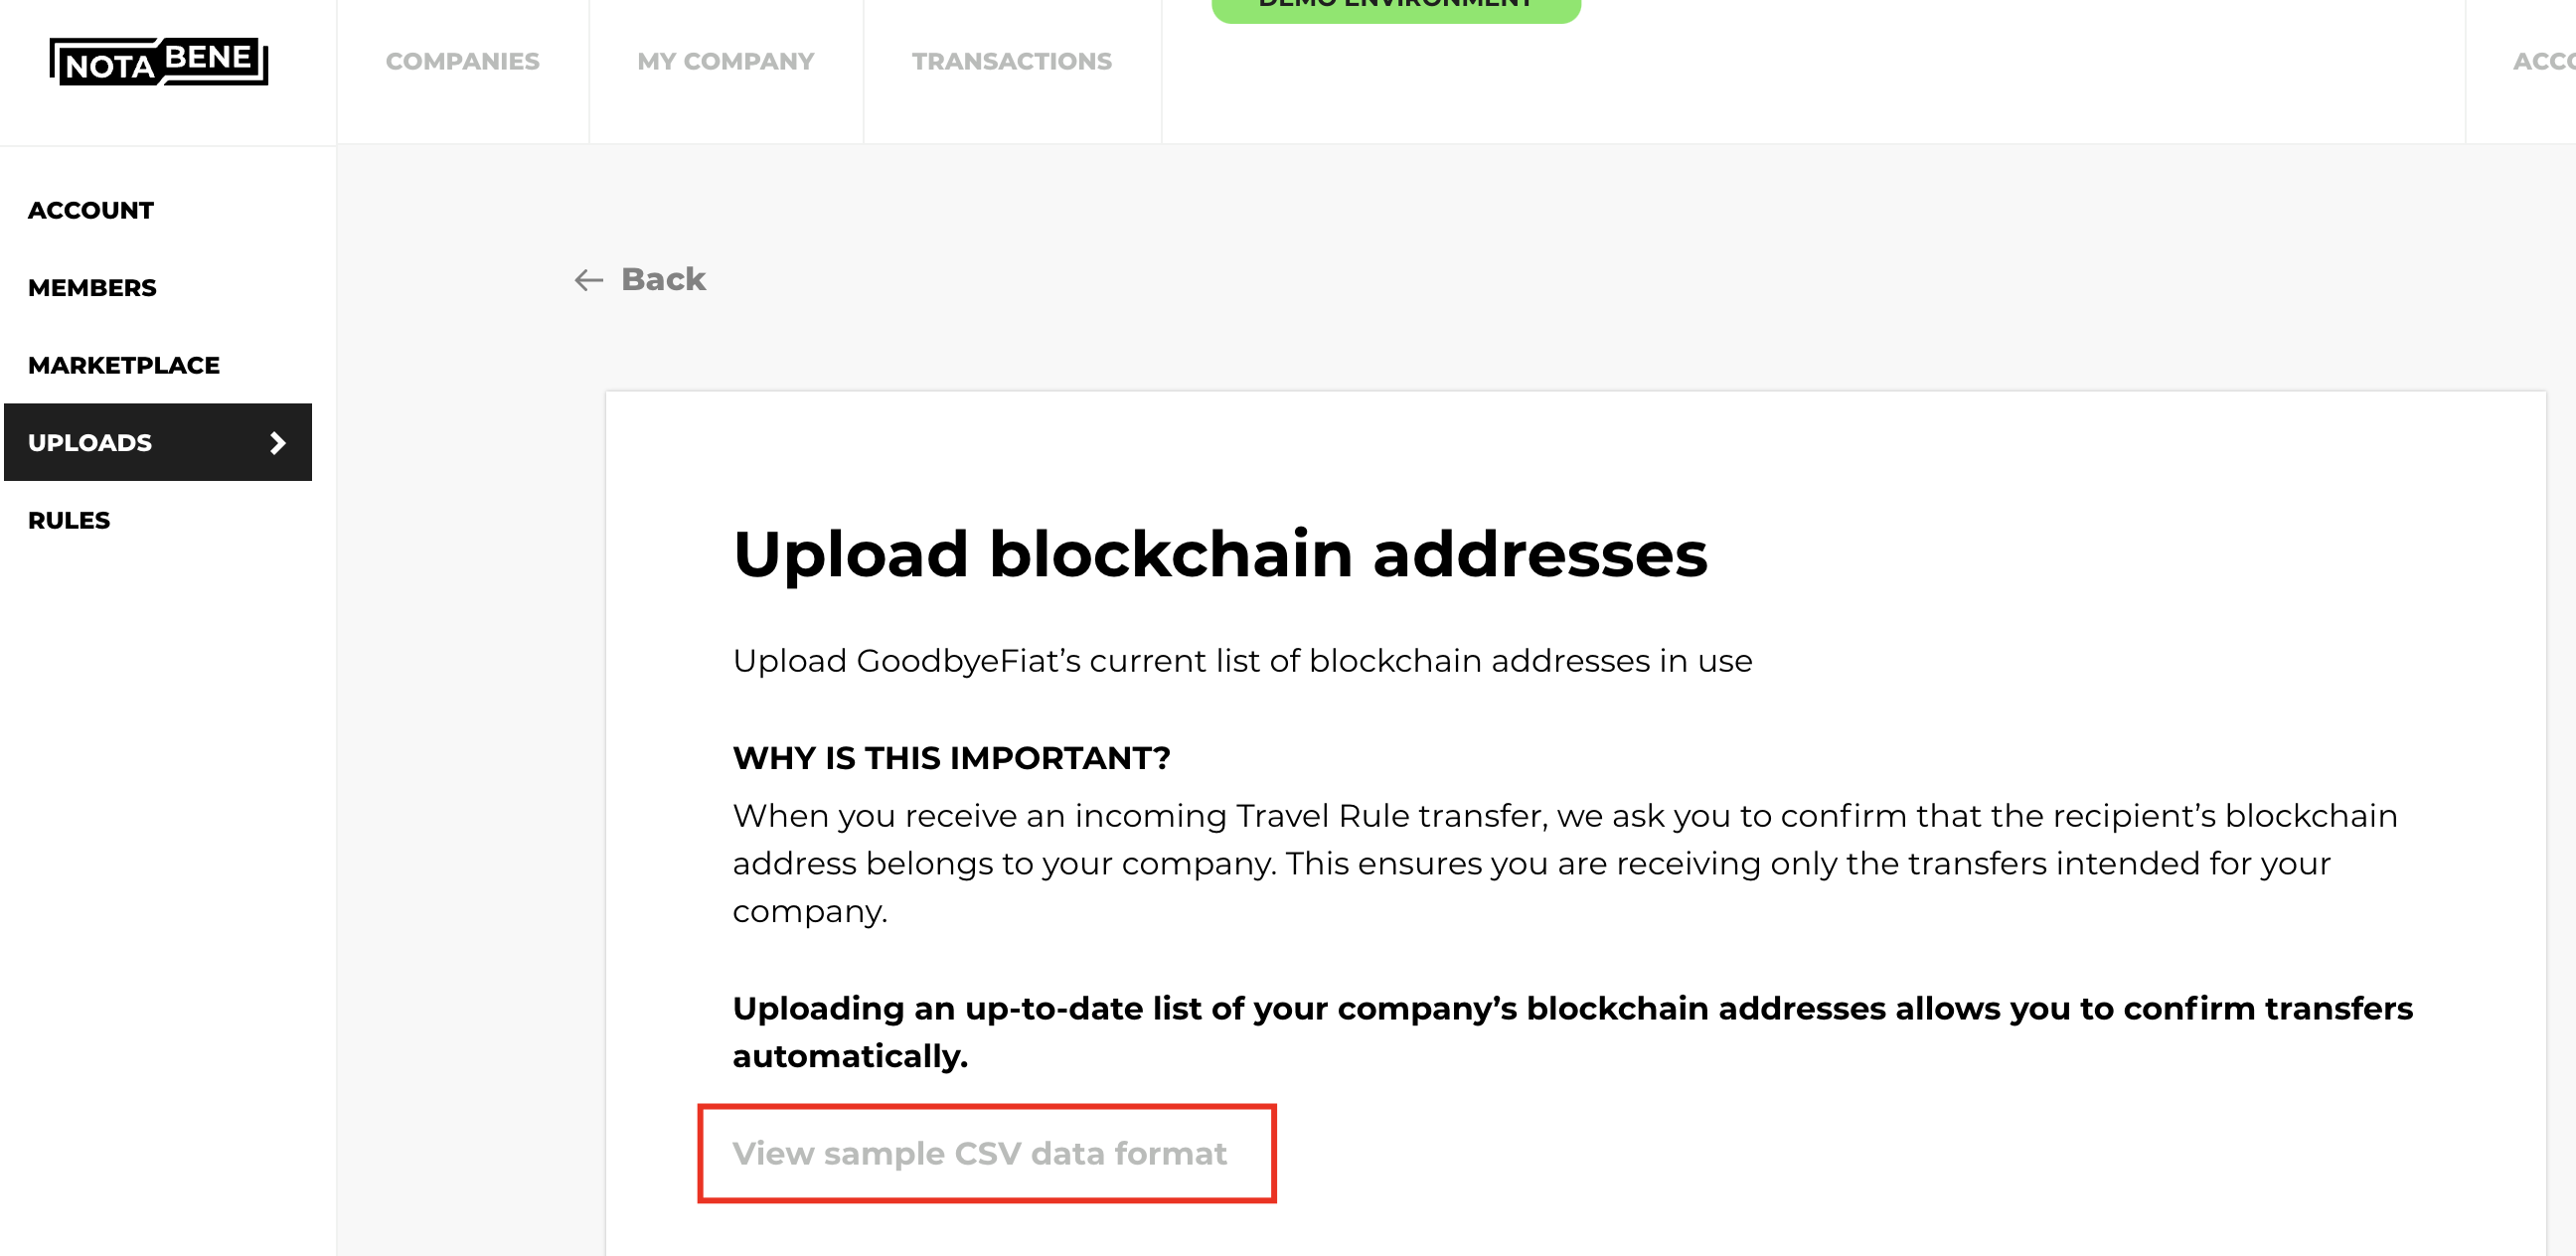 Upload a file with blockchain addresses manually